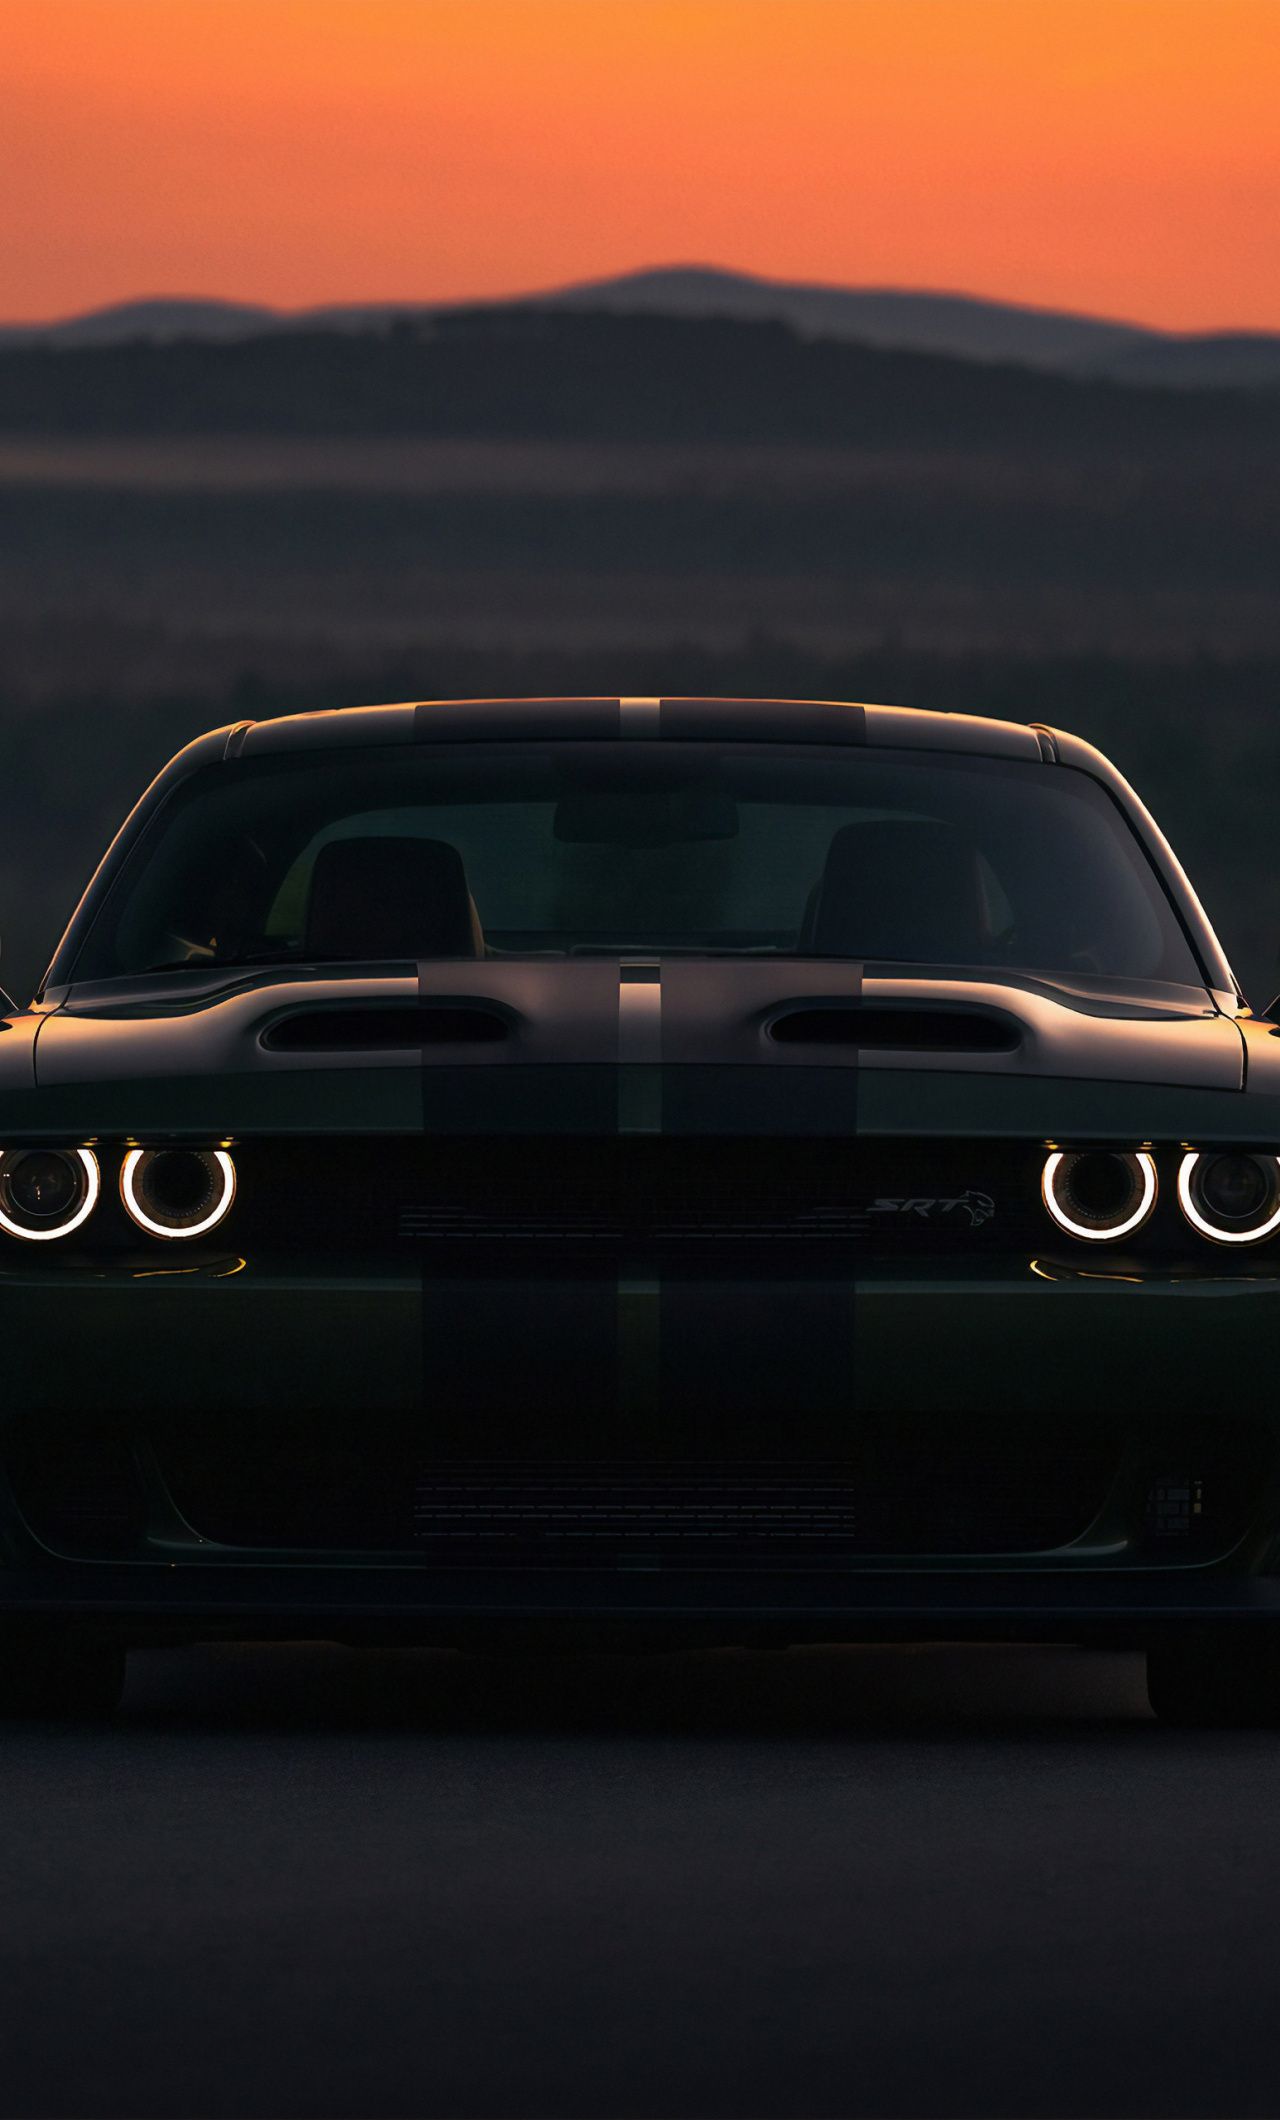 Download wallpaper 1280x2120 black muscle car dodge challenger iphone 6  plus 1280x2120 hd background 19279